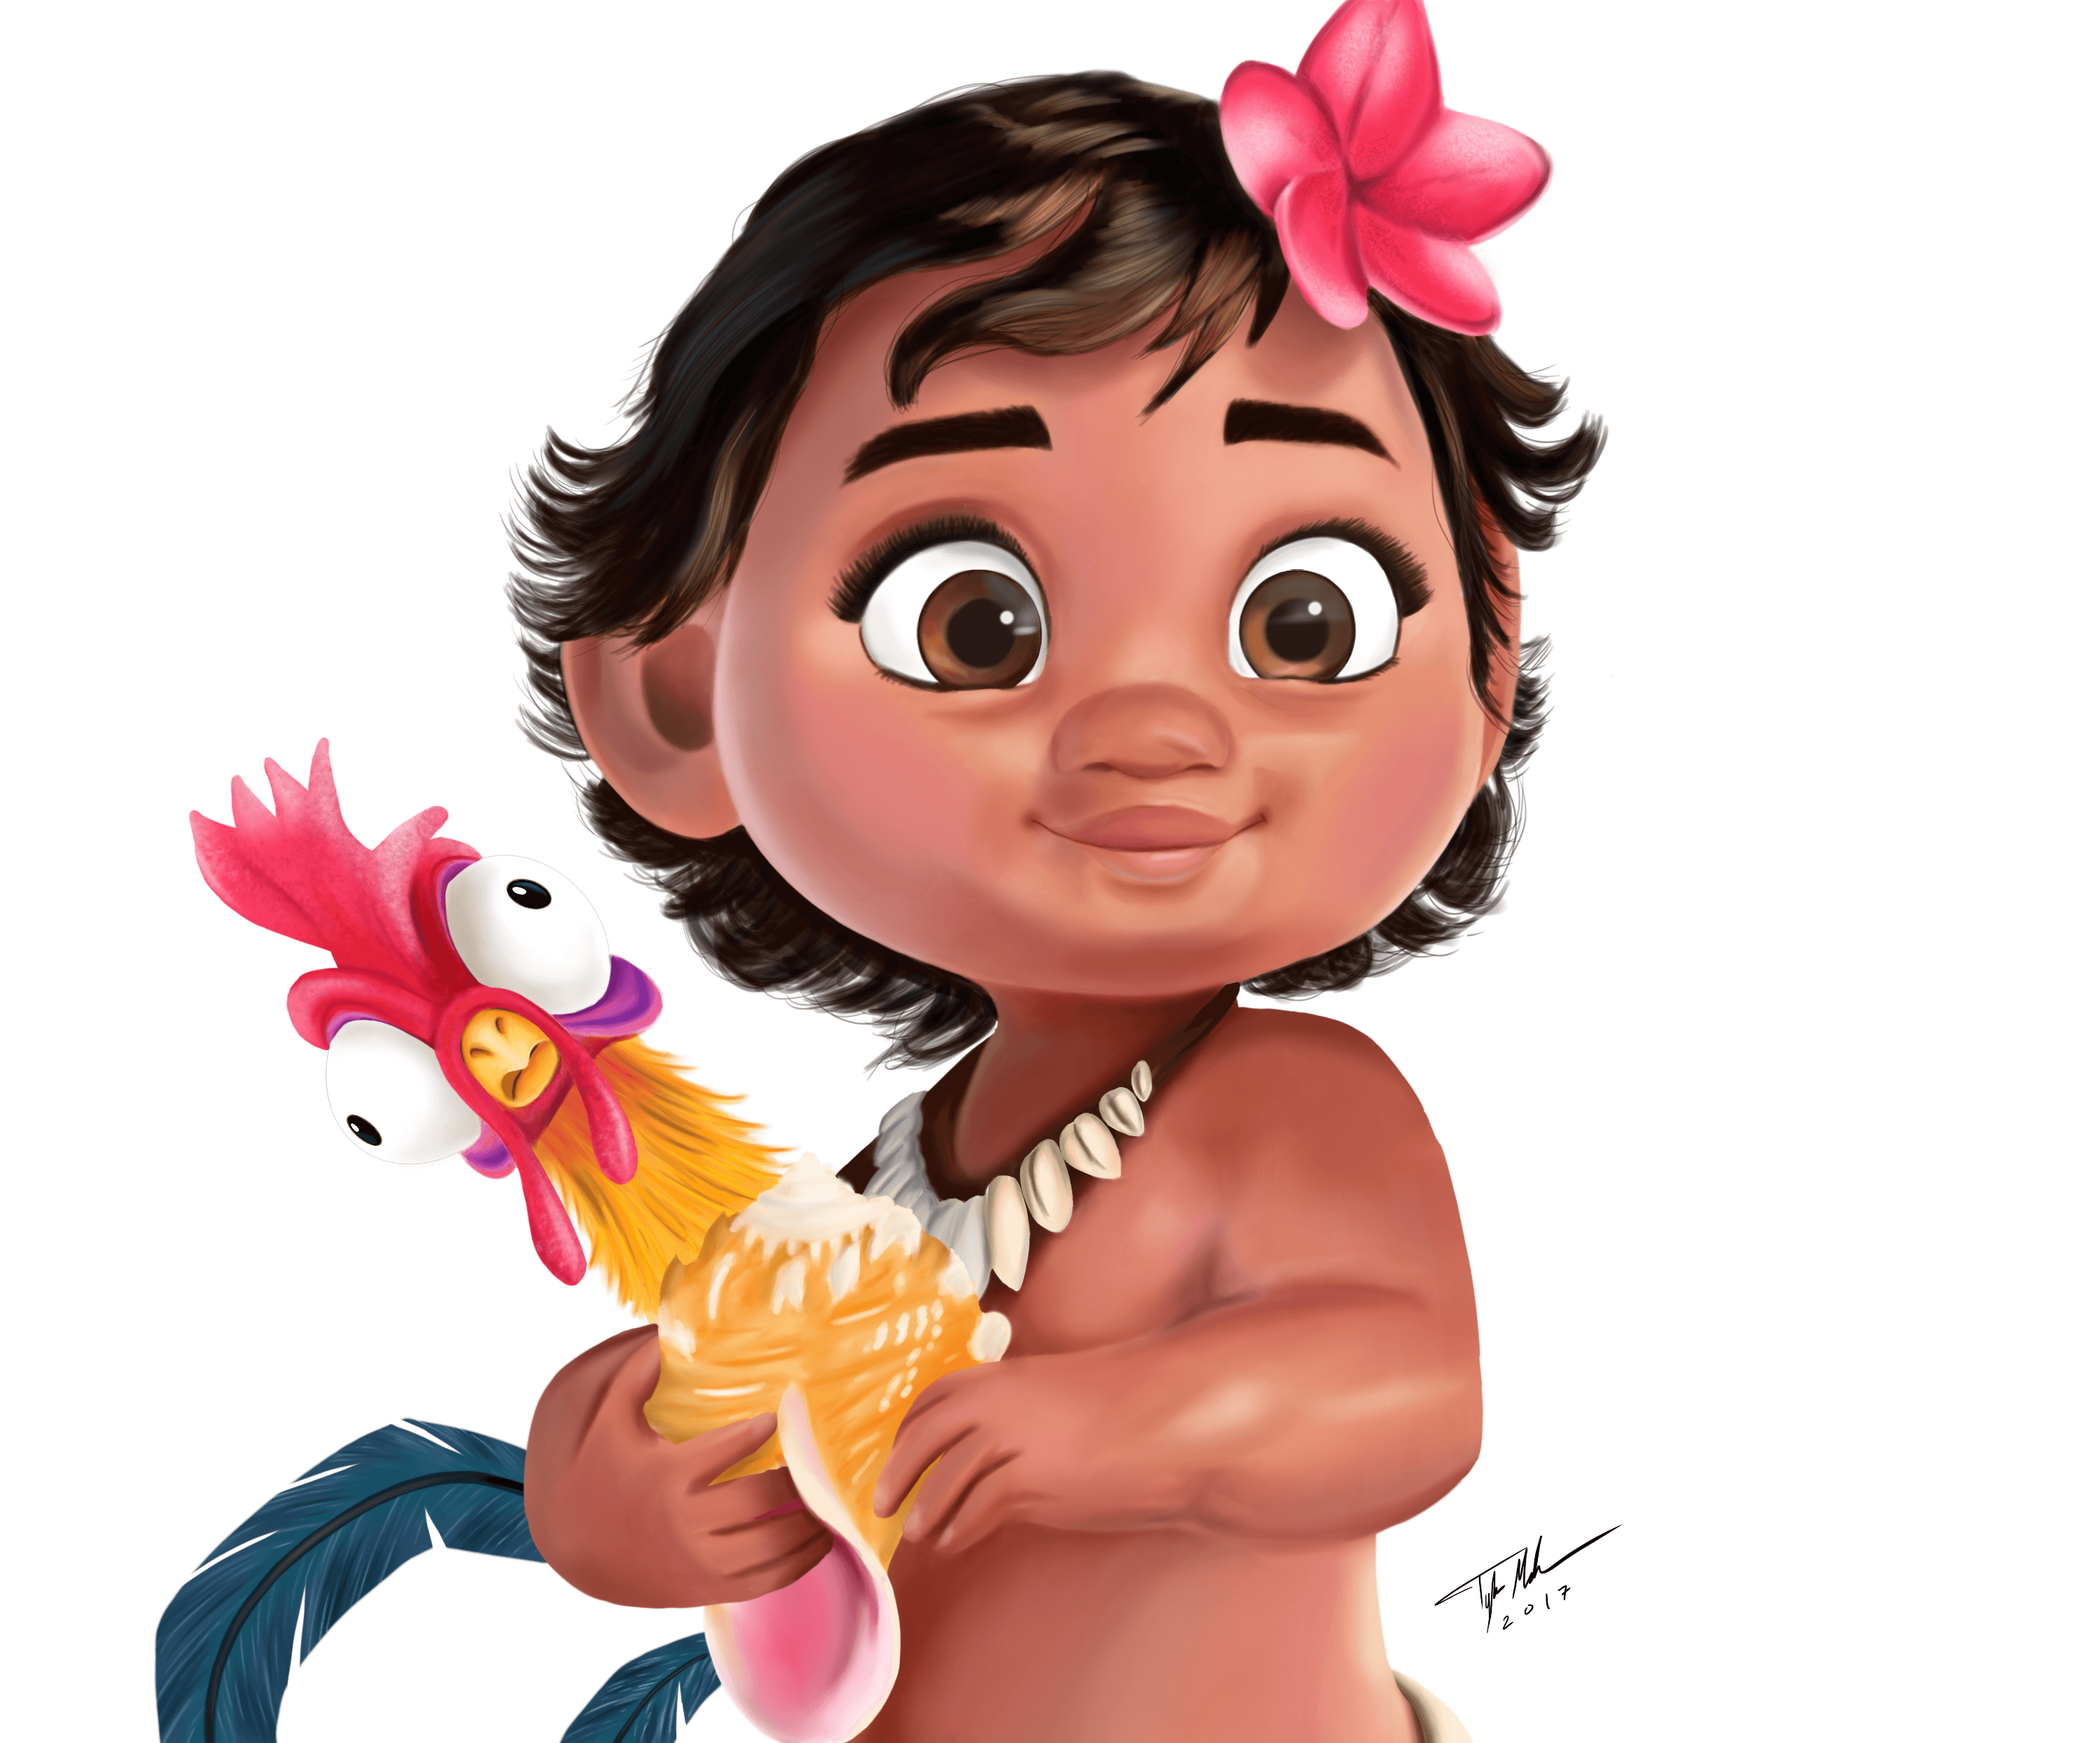 This is the cutest wallpaper of Little Baby Moana. Find more like